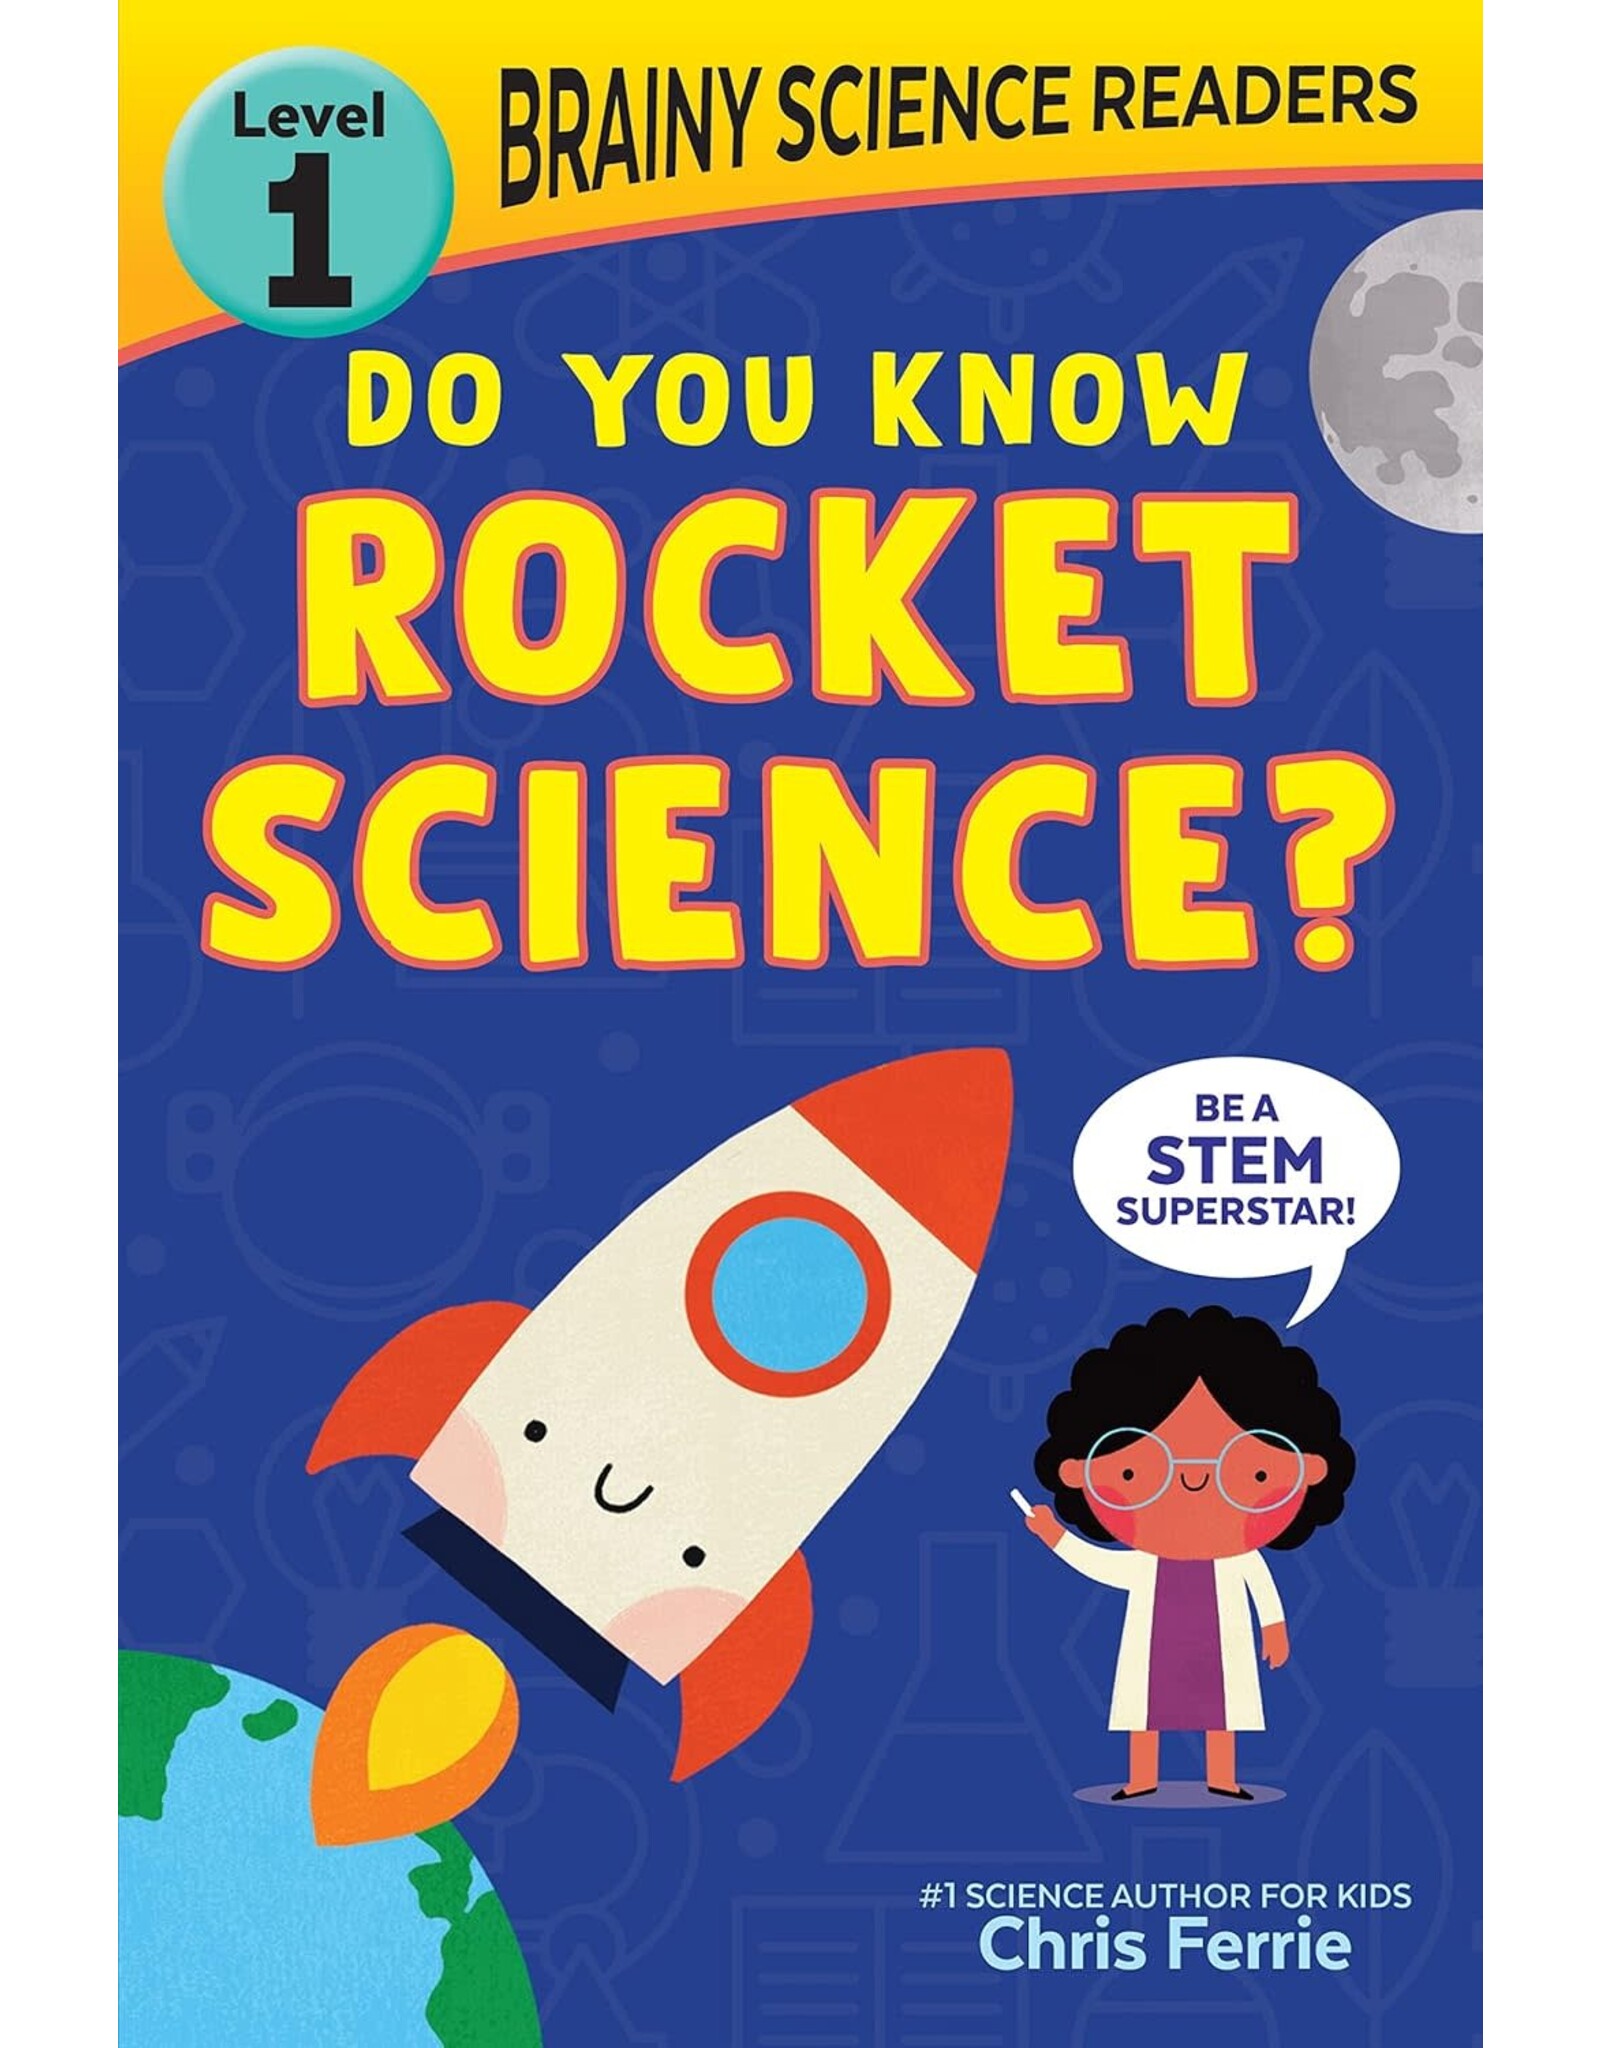 Brainy Science Readers: Do you know Rocket Science?